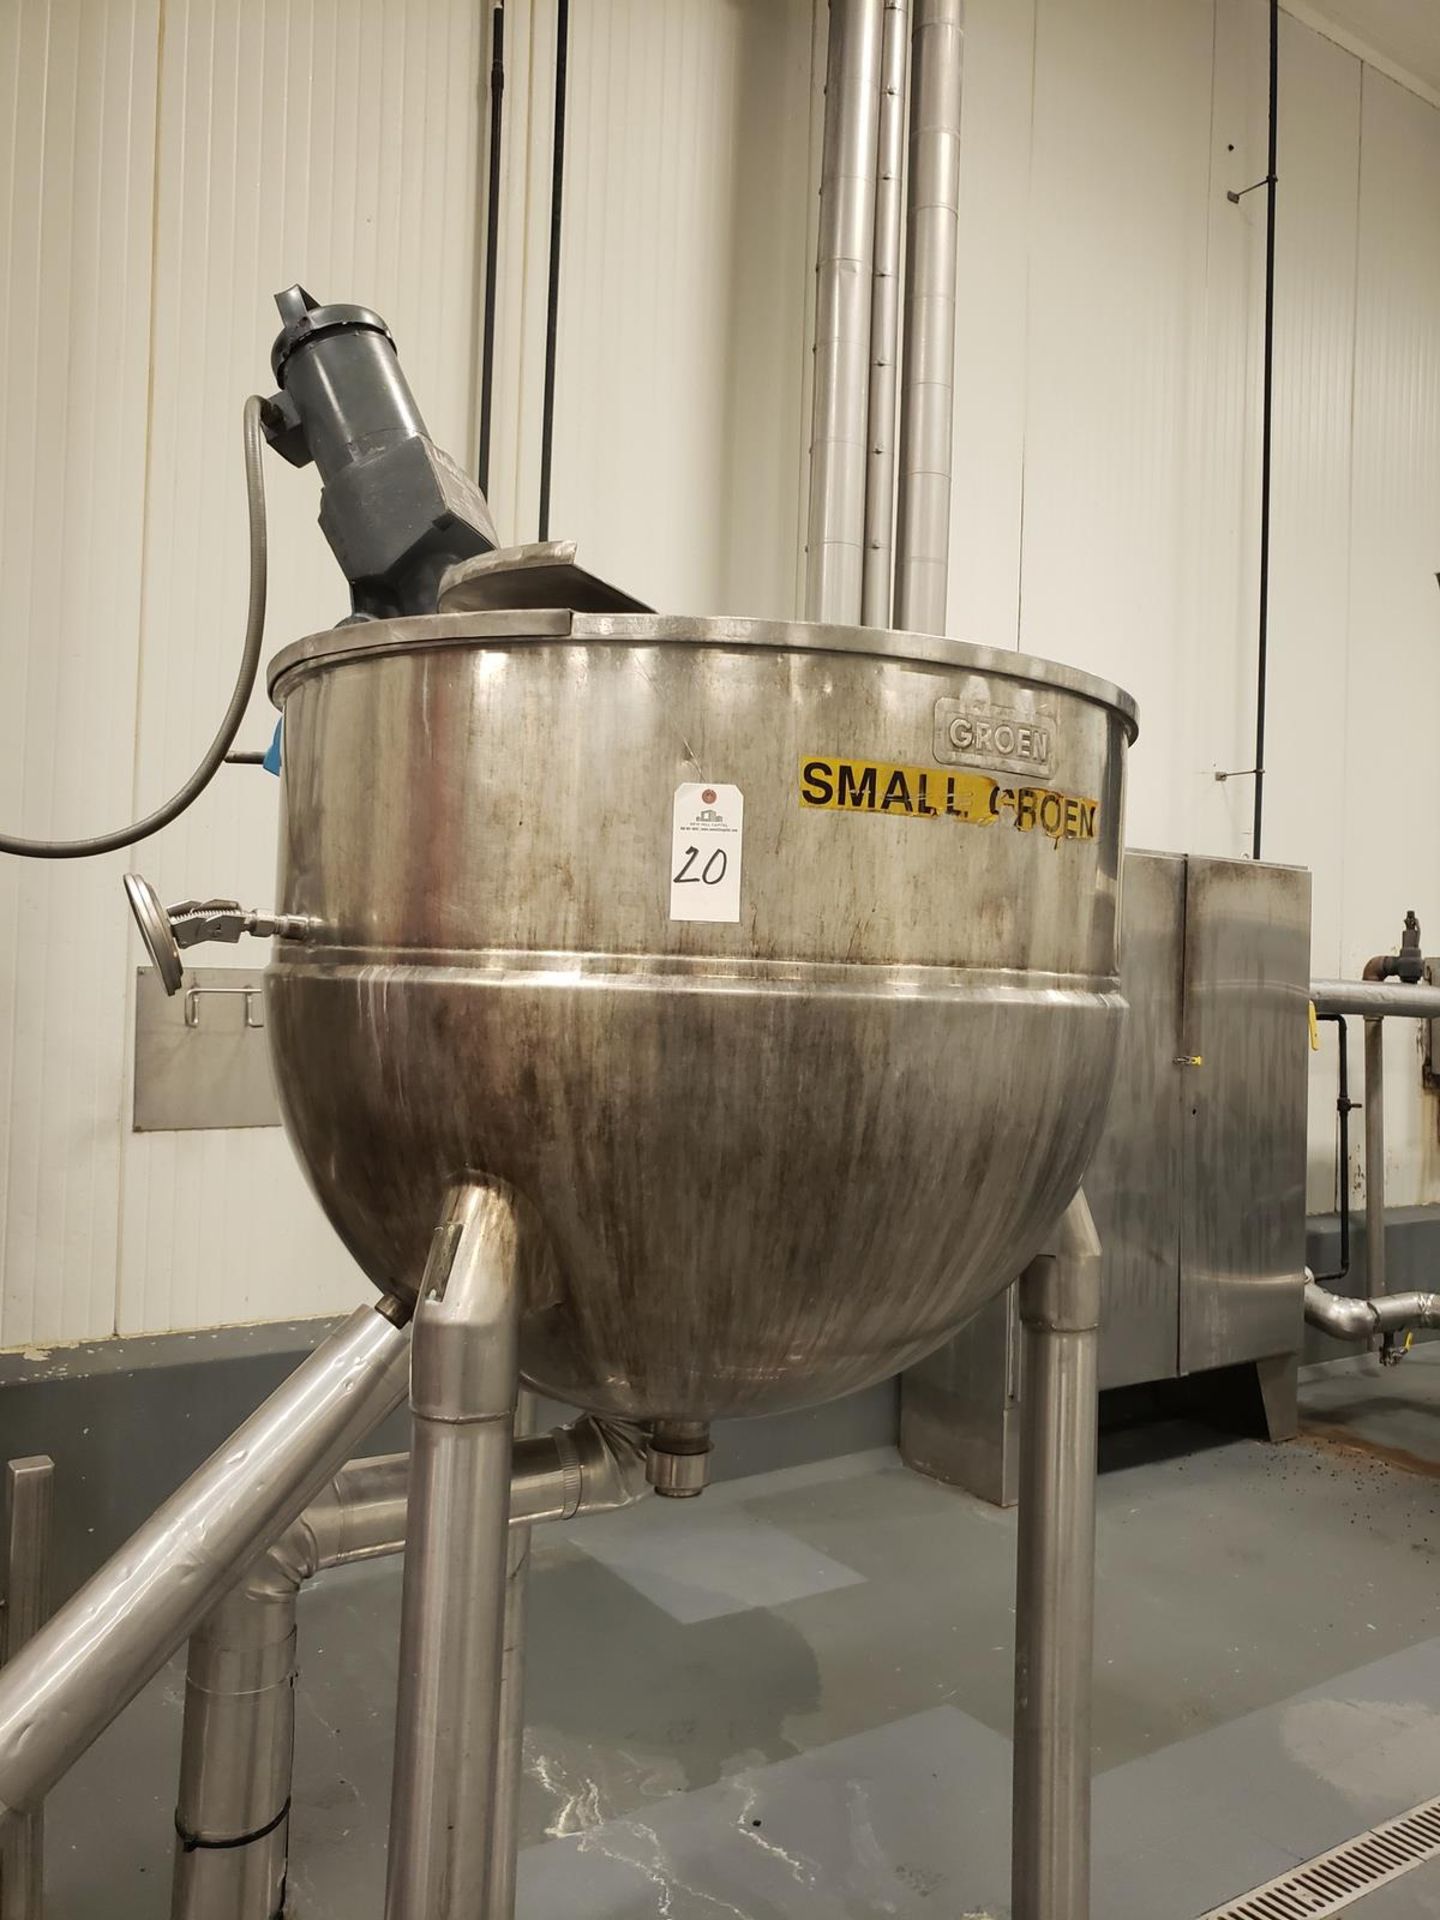 Kettle - Groen 150 Gallon Jacketed, Agitated Mixing Kettle, M# N150SP - Loc: NJ | Rig Fee: $300